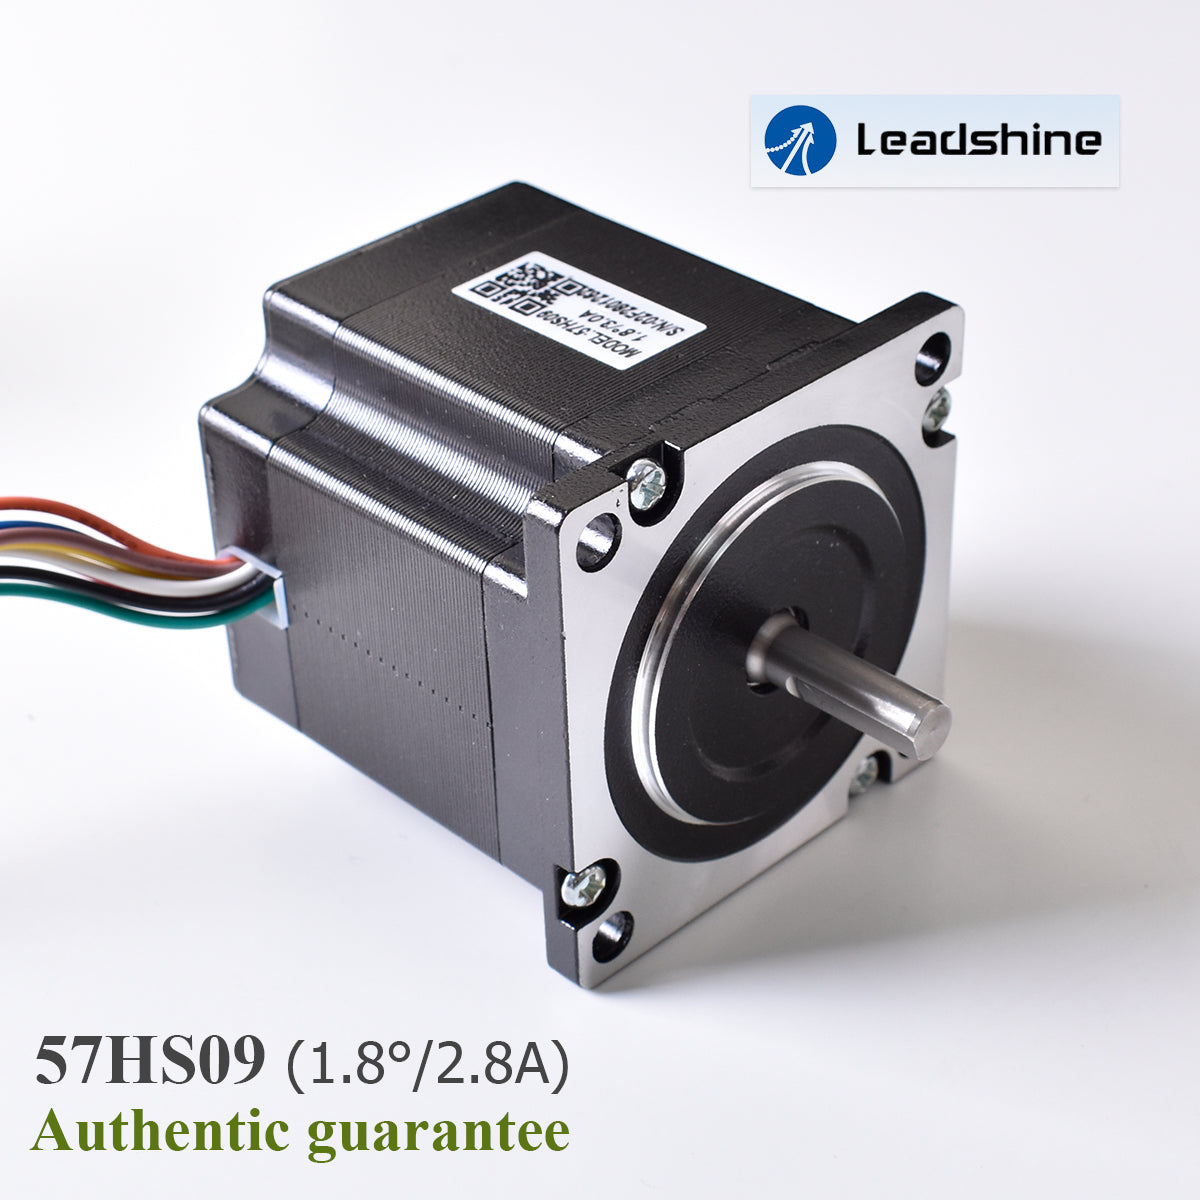 Leadshine 2 Phase Stepper Motor 57HS09 8 Wires Axis Diameter 6.35mm Axis Length 21mm NEMA23 Stepping Motor